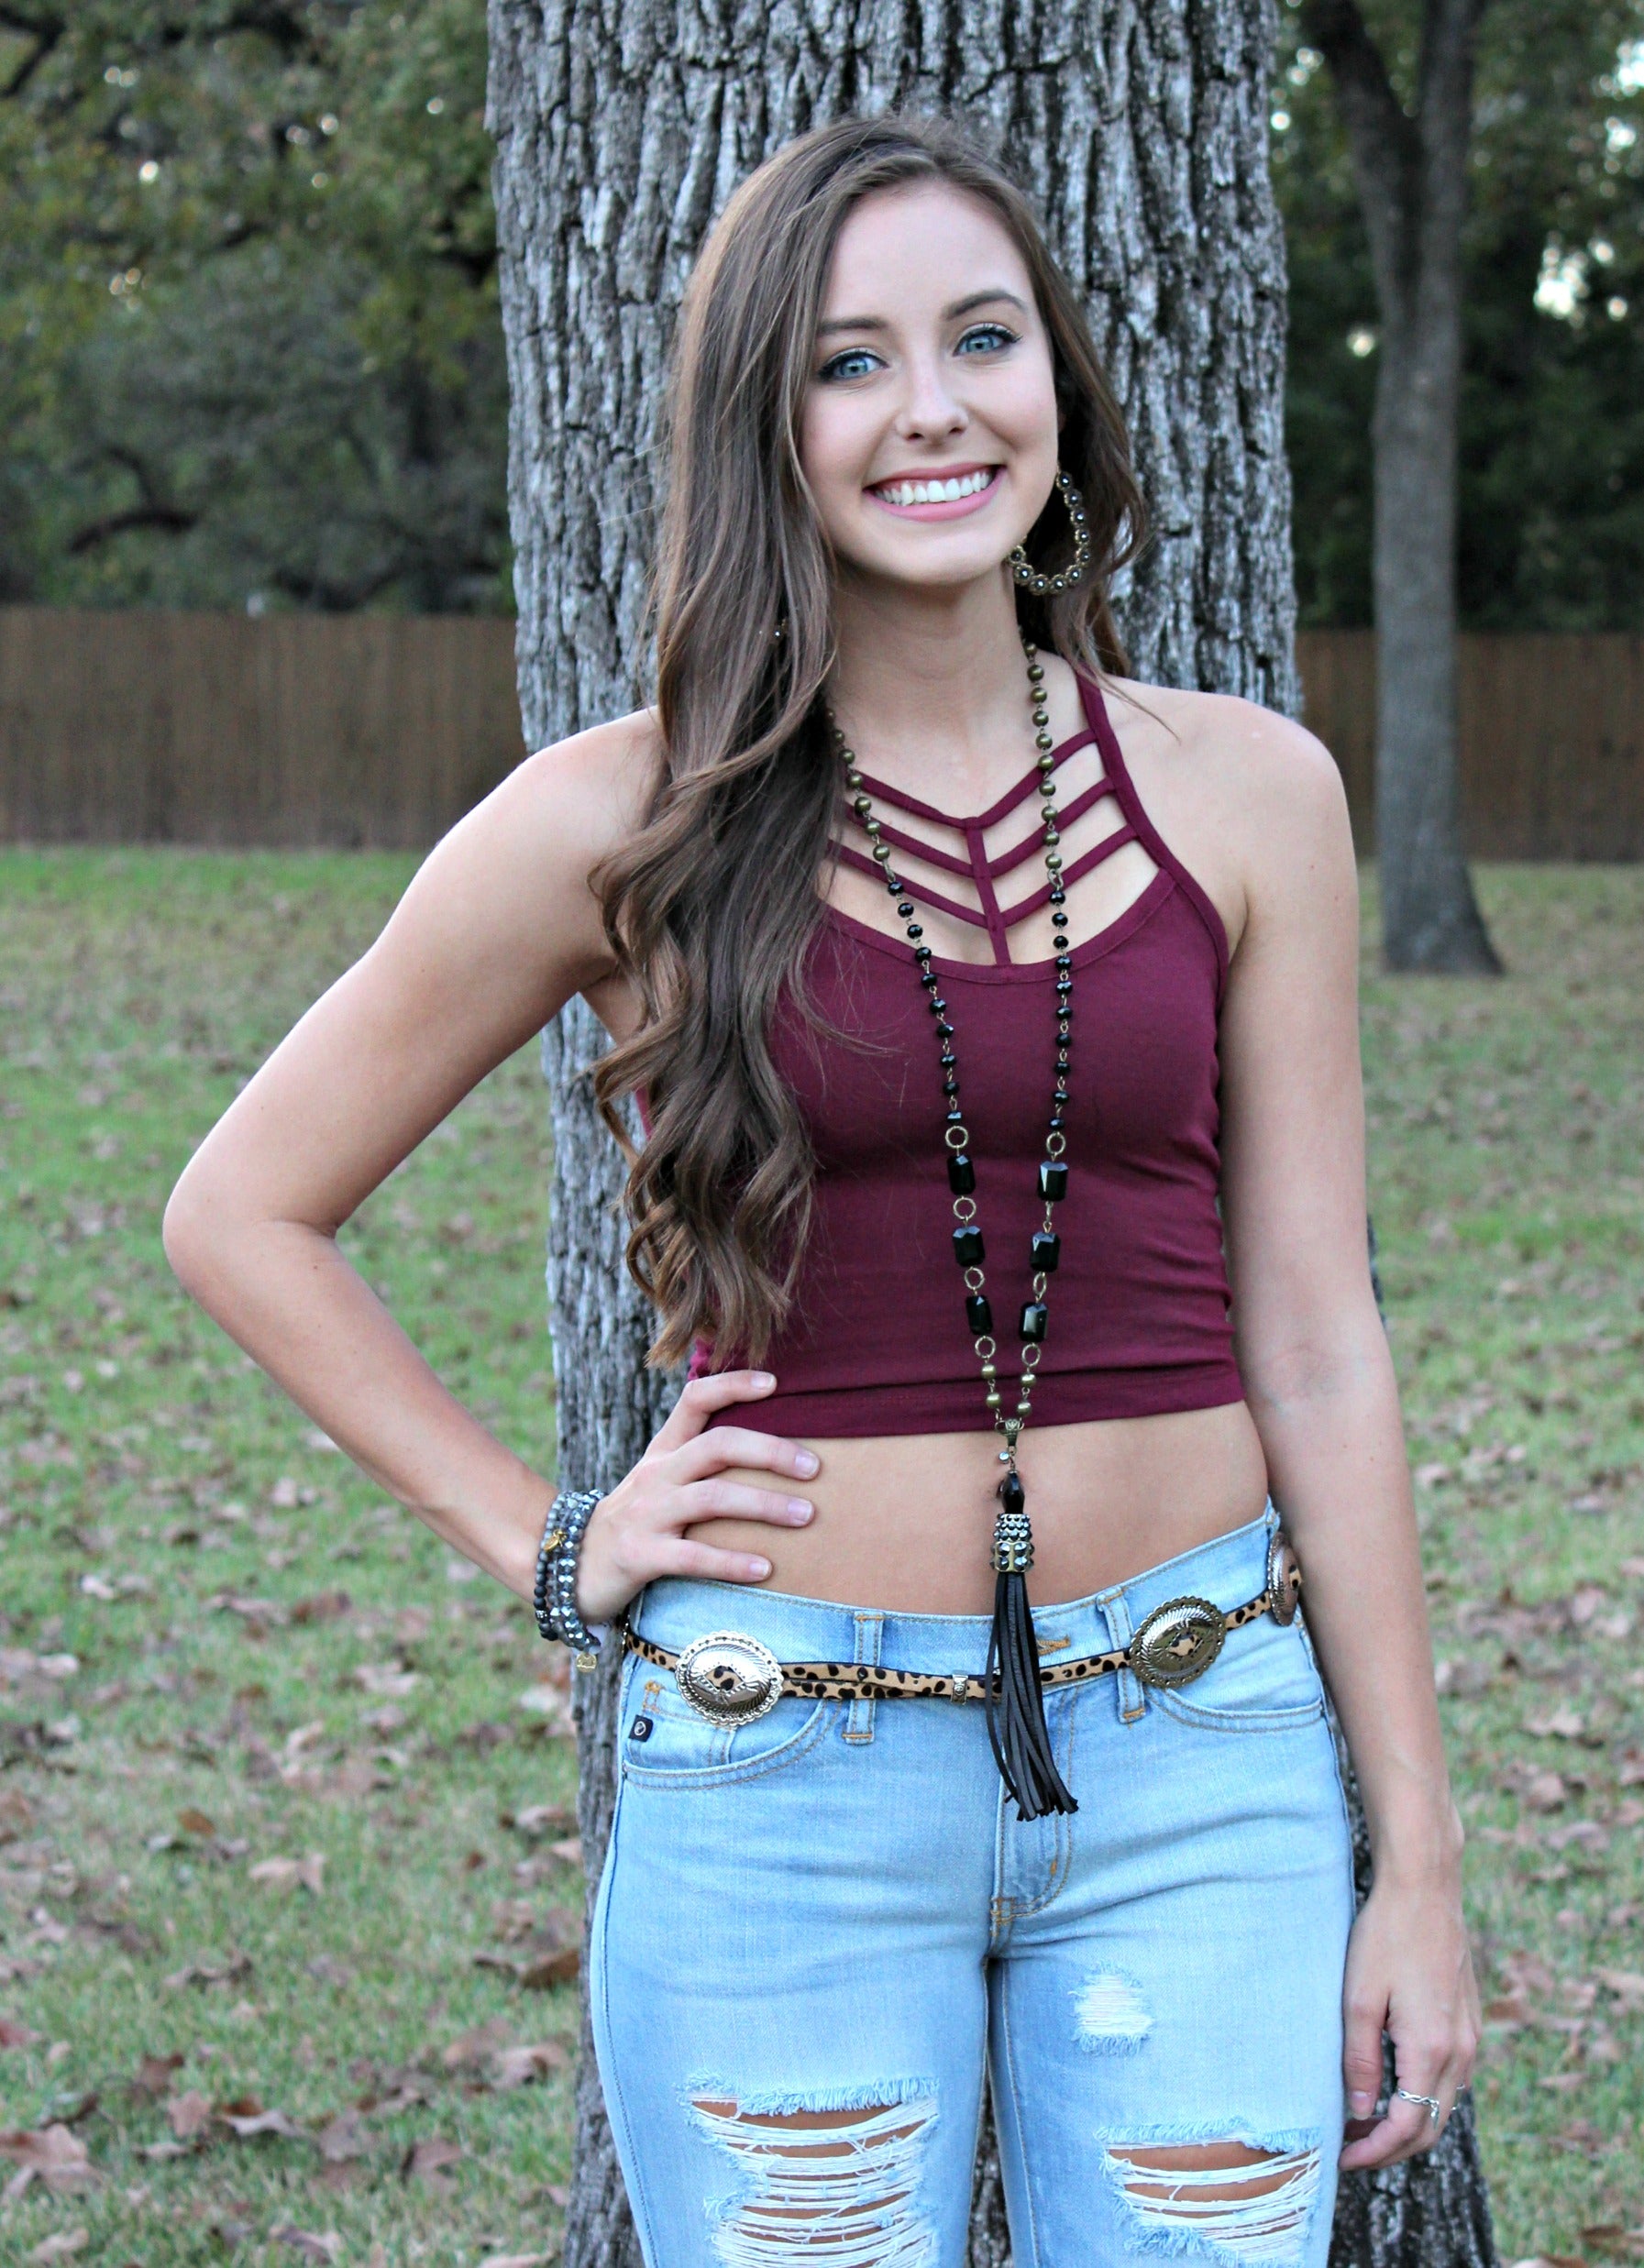 Leading Edge Caged Crop Top in Maroon - Giddy Up Glamour Boutique